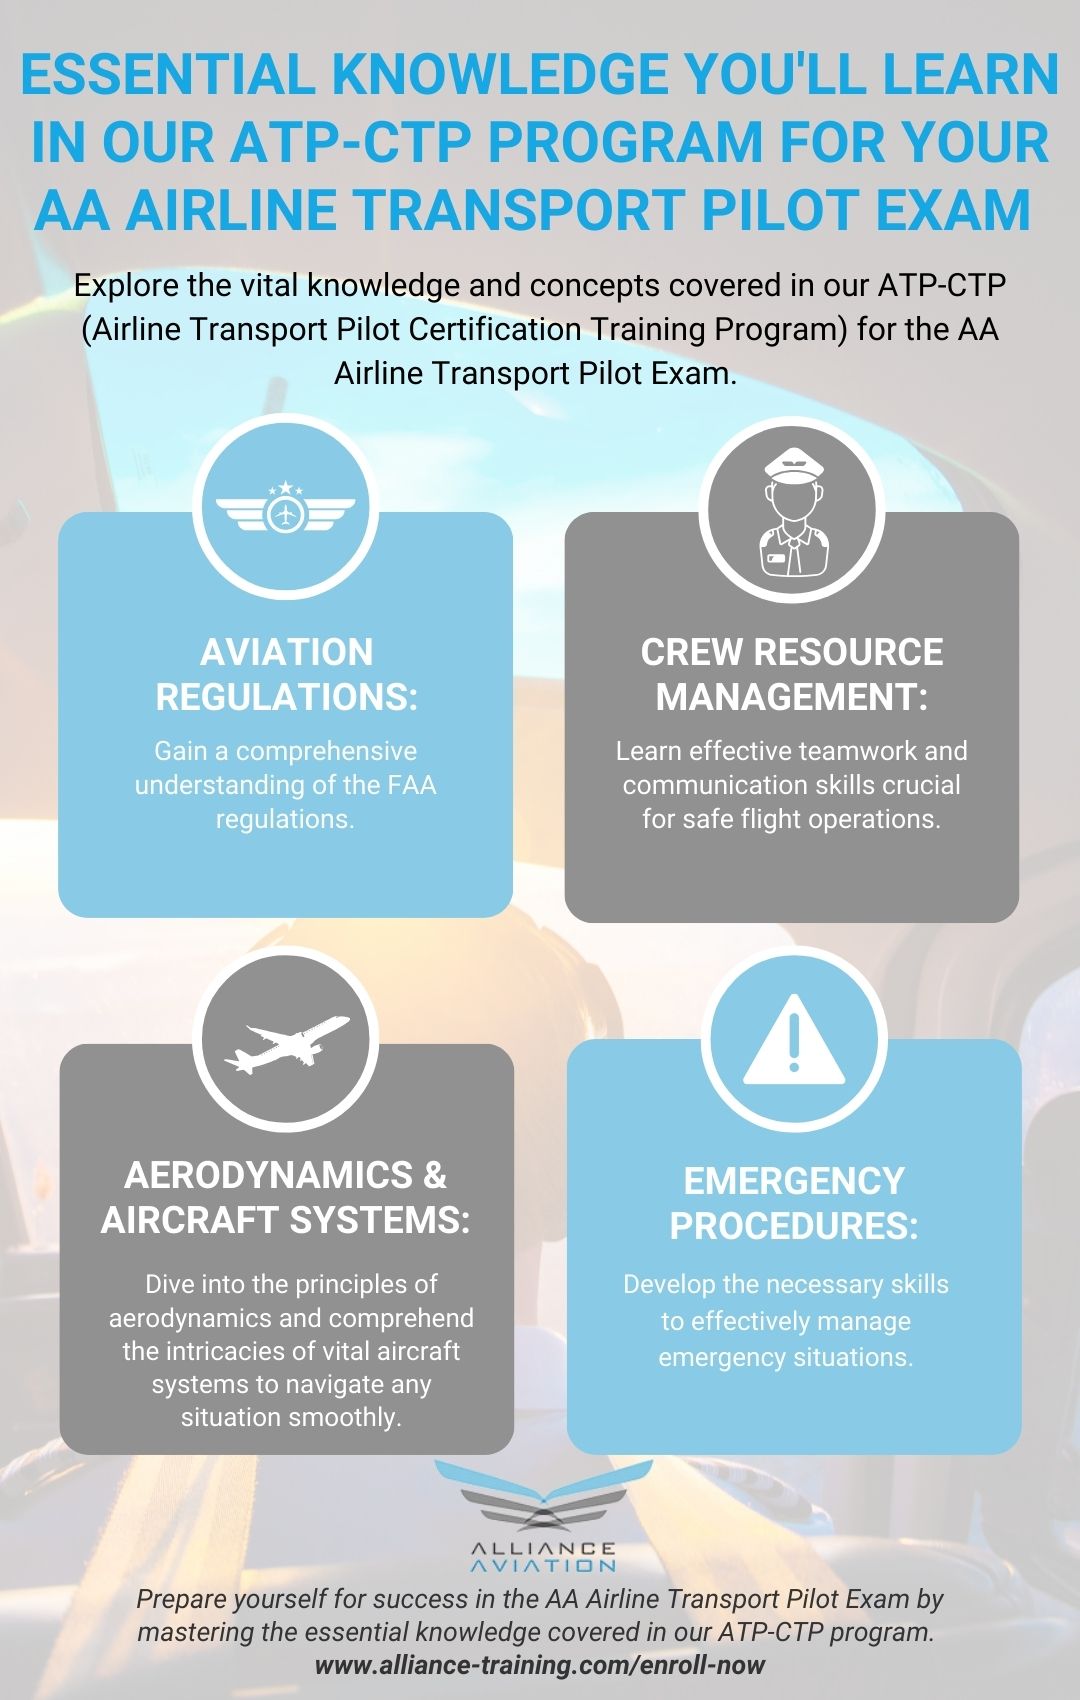 Essential Knowledge You'll Learn in Our ATP-CTP Program for Your AA Airline Transport Pilot Exam Infographic